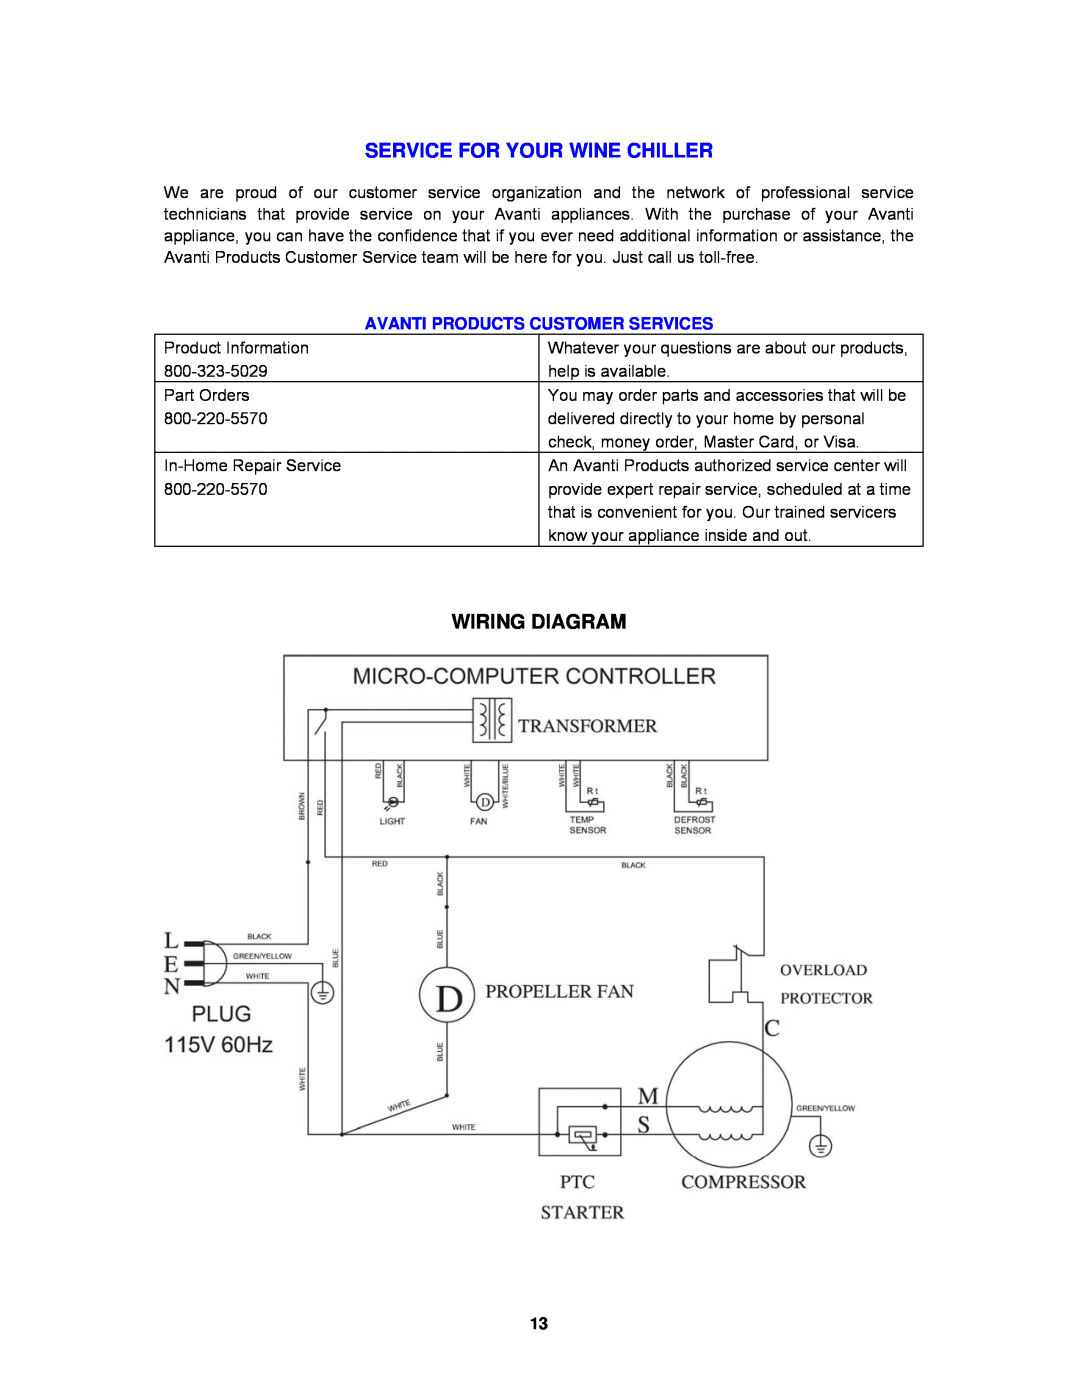 Avanti WC55SSR instruction manual Service For Your Wine Chiller, Wiring Diagram, Avanti Products Customer Services 